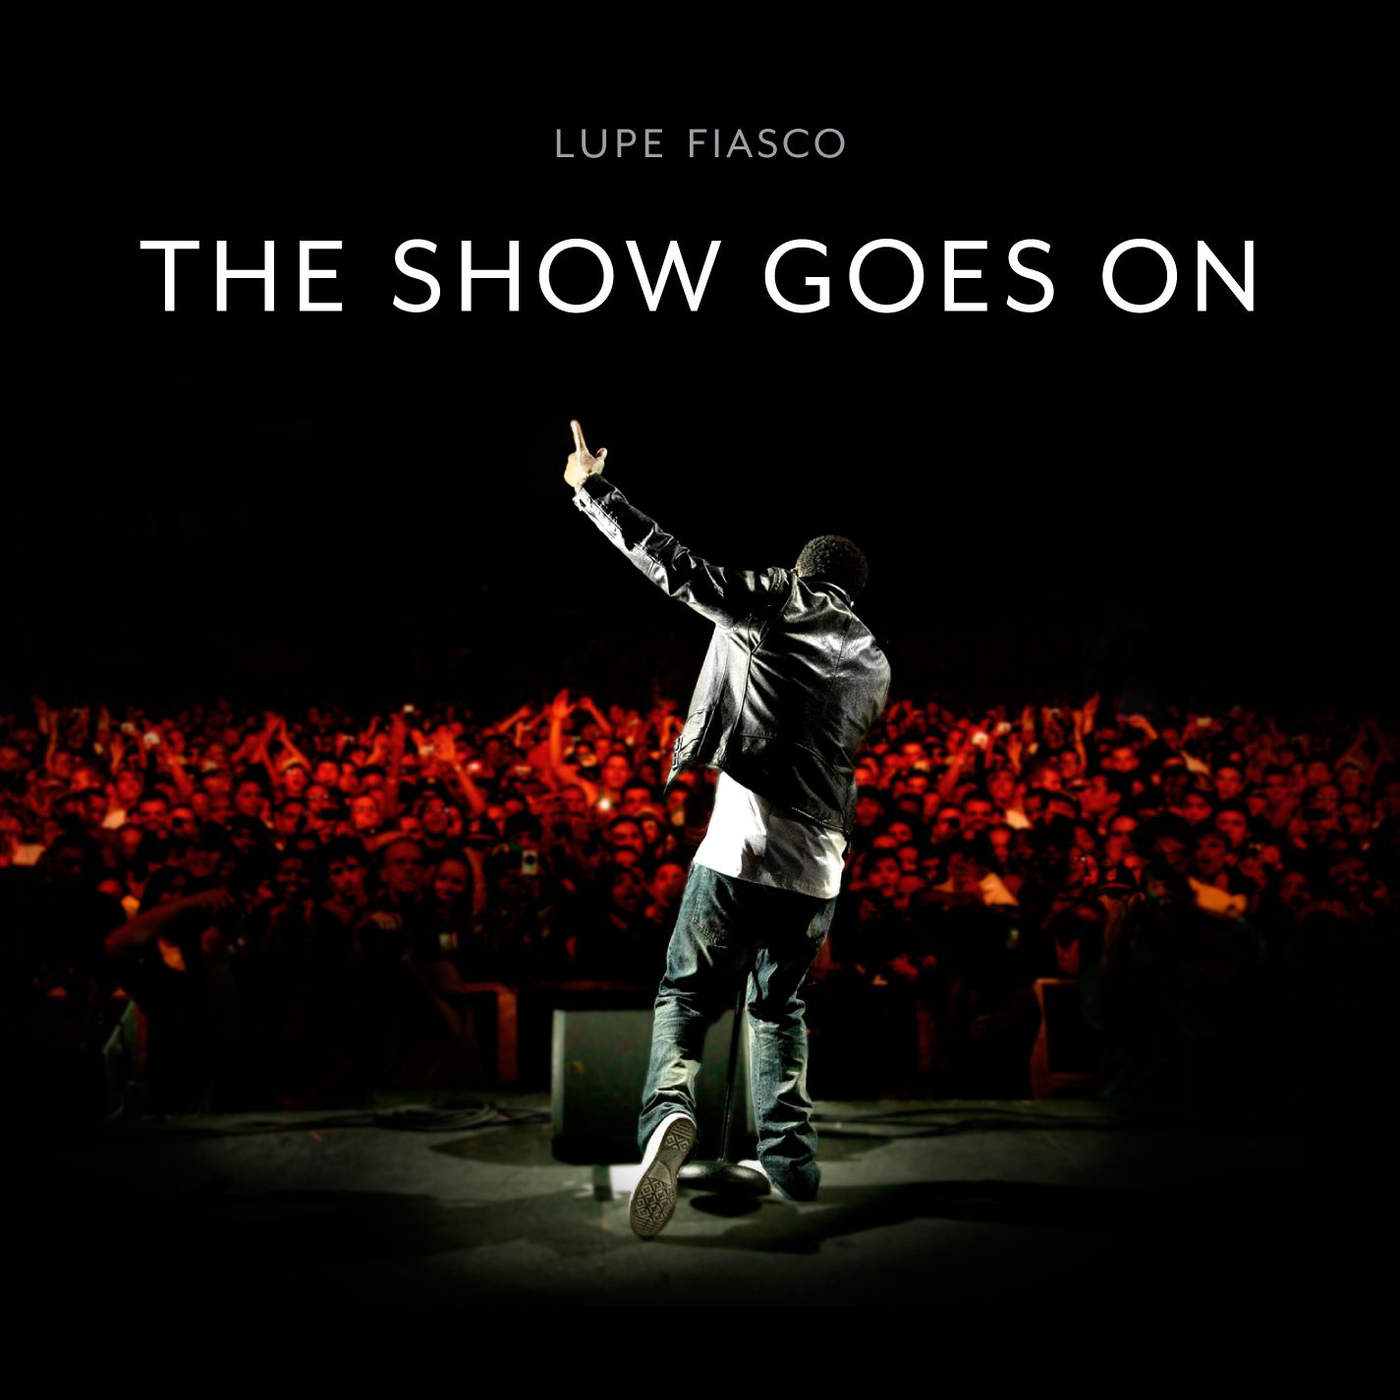 Art for The Show Goes On by Lupe Fiasco